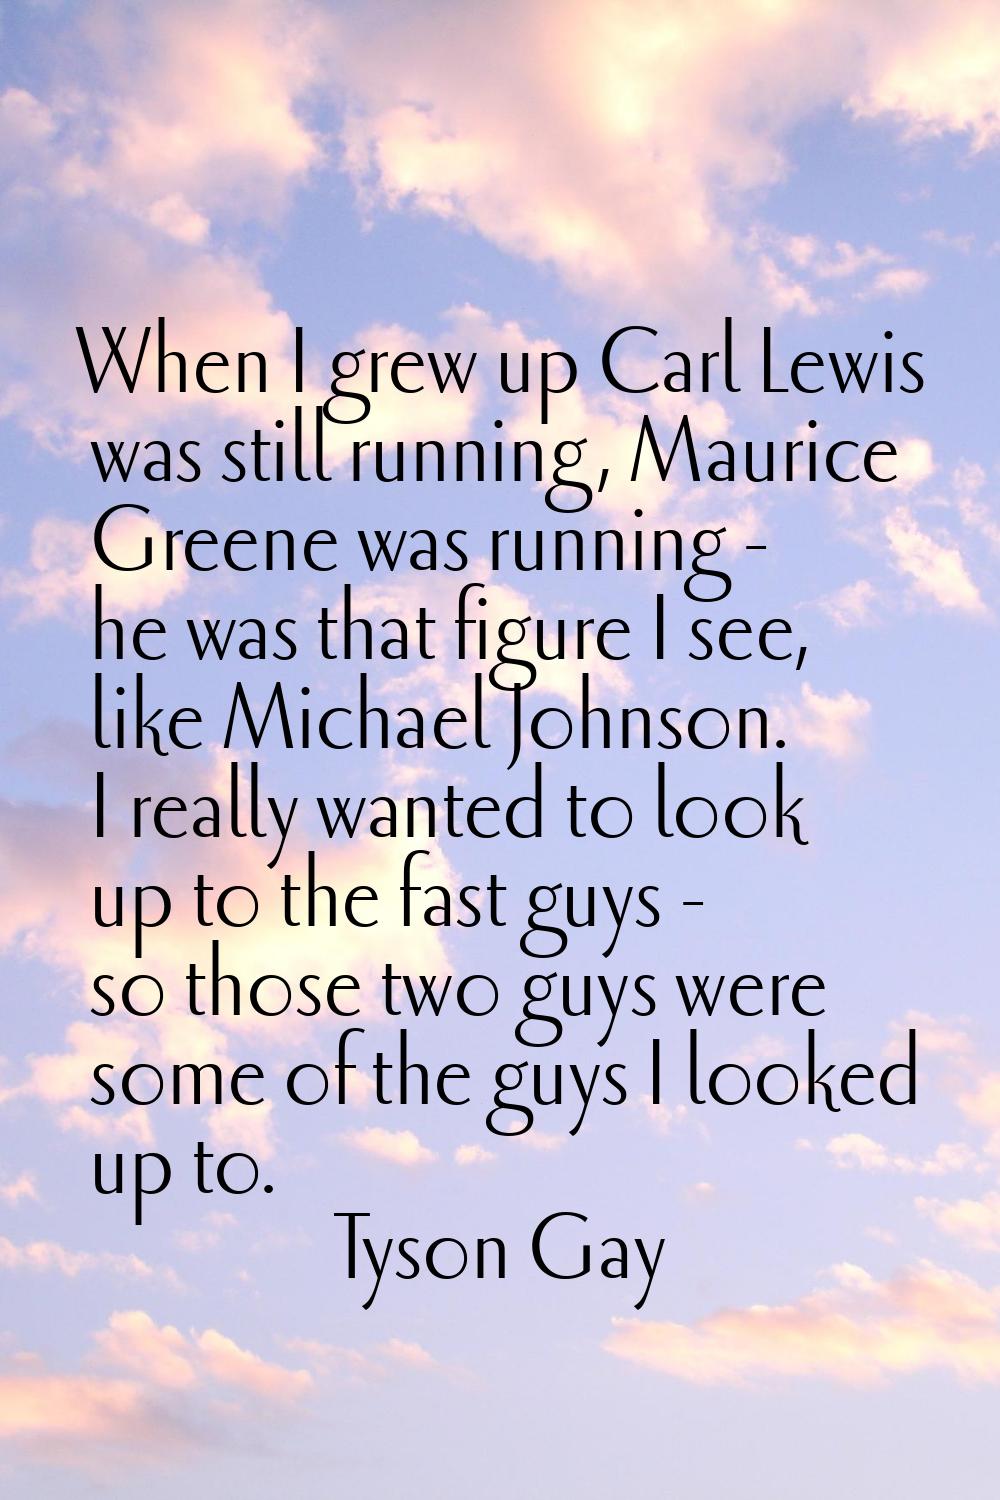 When I grew up Carl Lewis was still running, Maurice Greene was running - he was that figure I see,